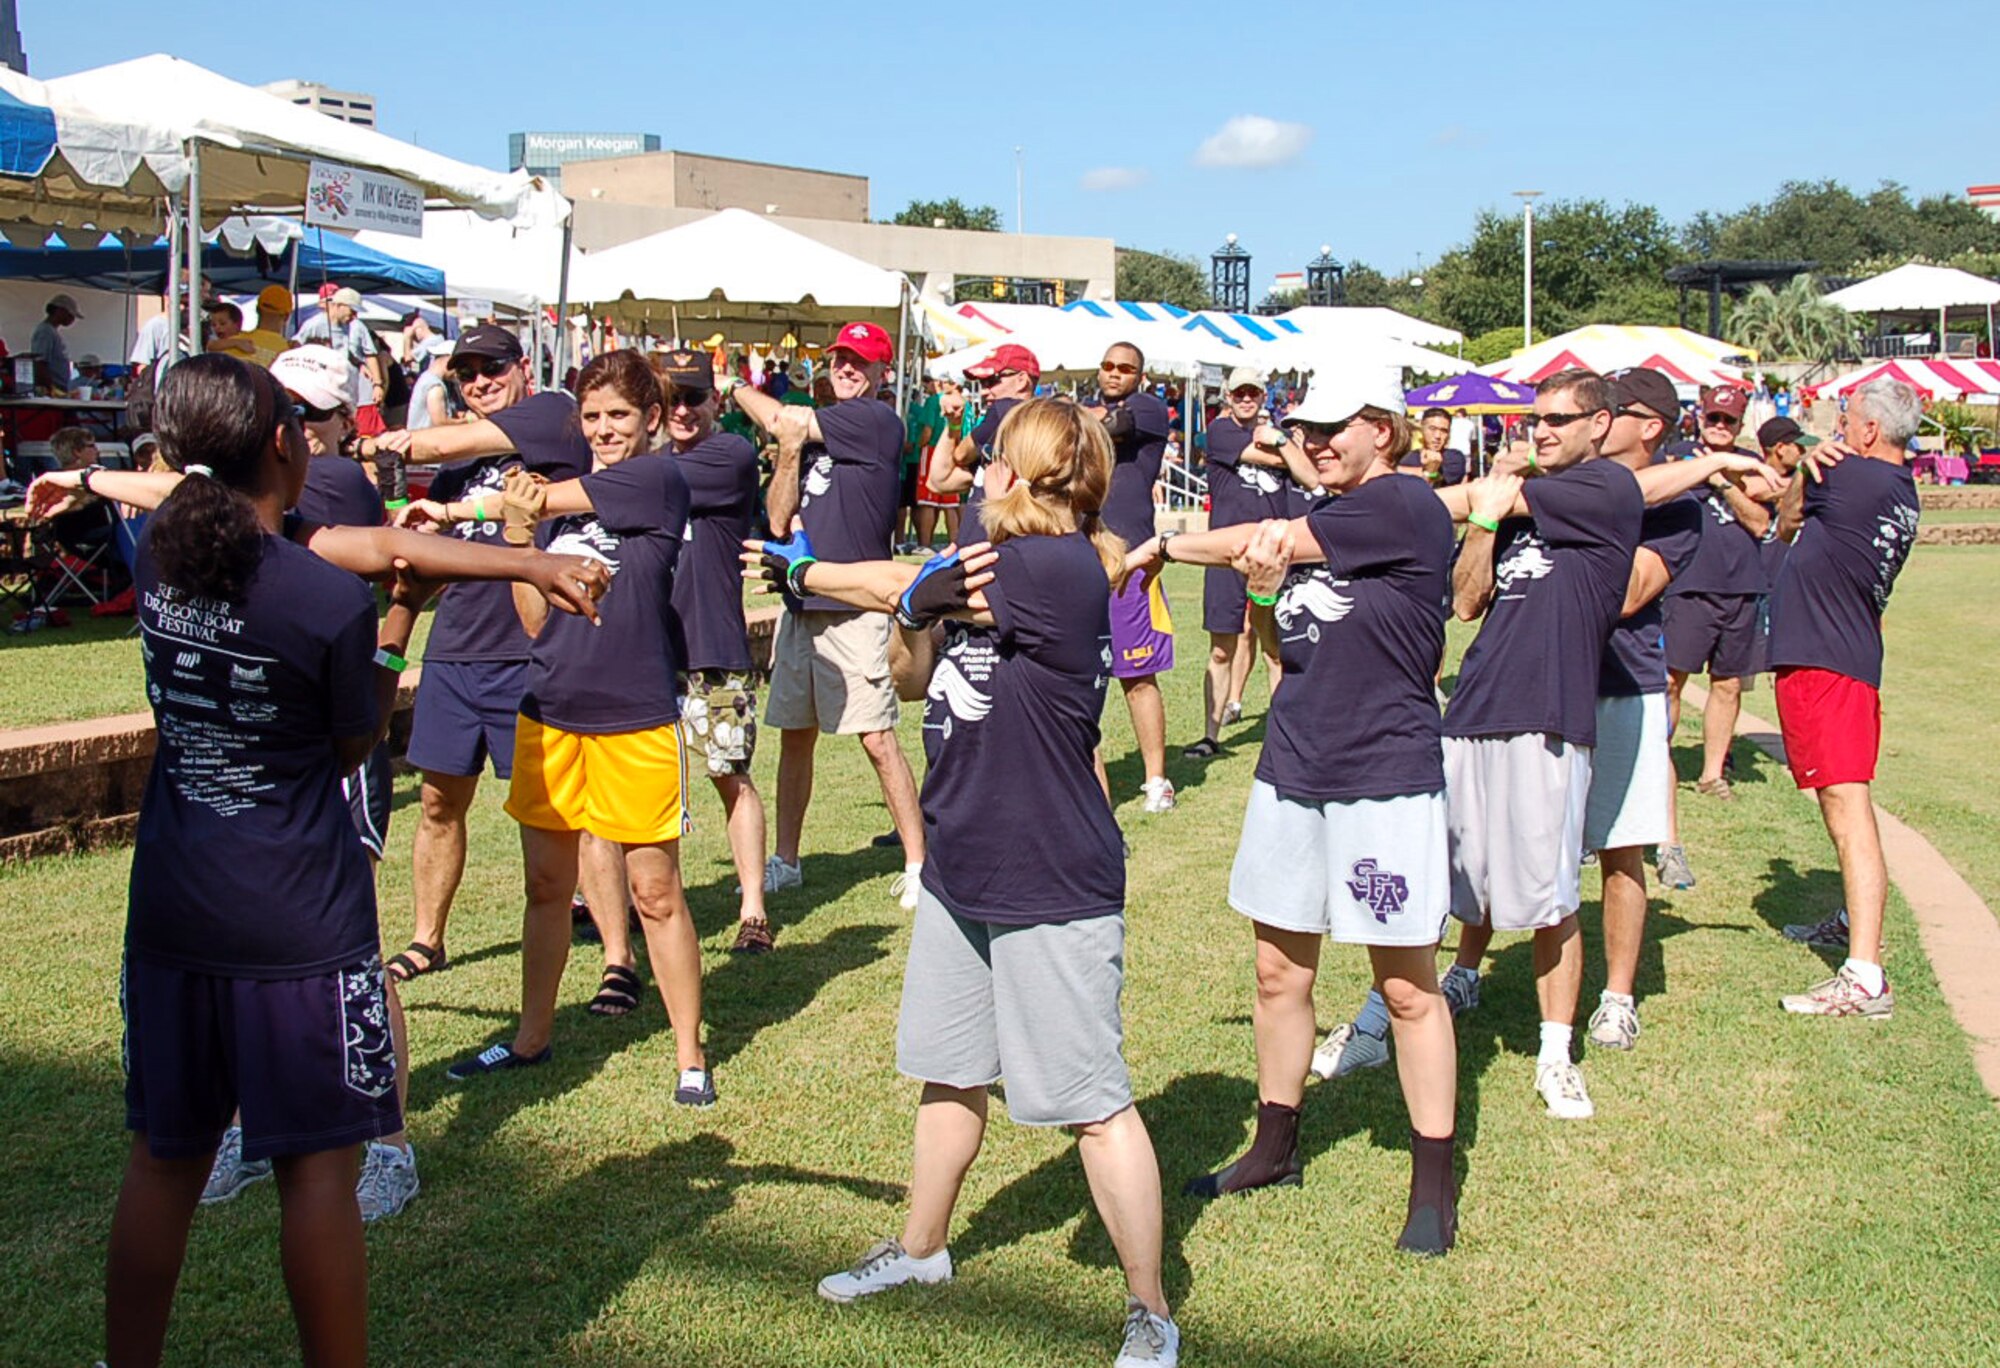 SHREVEPORT, La. – Members of the Eighth Air Force dragon boat team stretch before their first race of the day Sept. 11. The team competed against 26 other teams during the 2nd Annual Red River Dragon Boat Festival held at the River View Park in Shreveport, La. The races feature 41-foot-long dragon boats that hold 21 team members, Eighth Air Force finished second in last year’s race. (U.S. Air Force photo by Staff Sgt. Brian Stives)